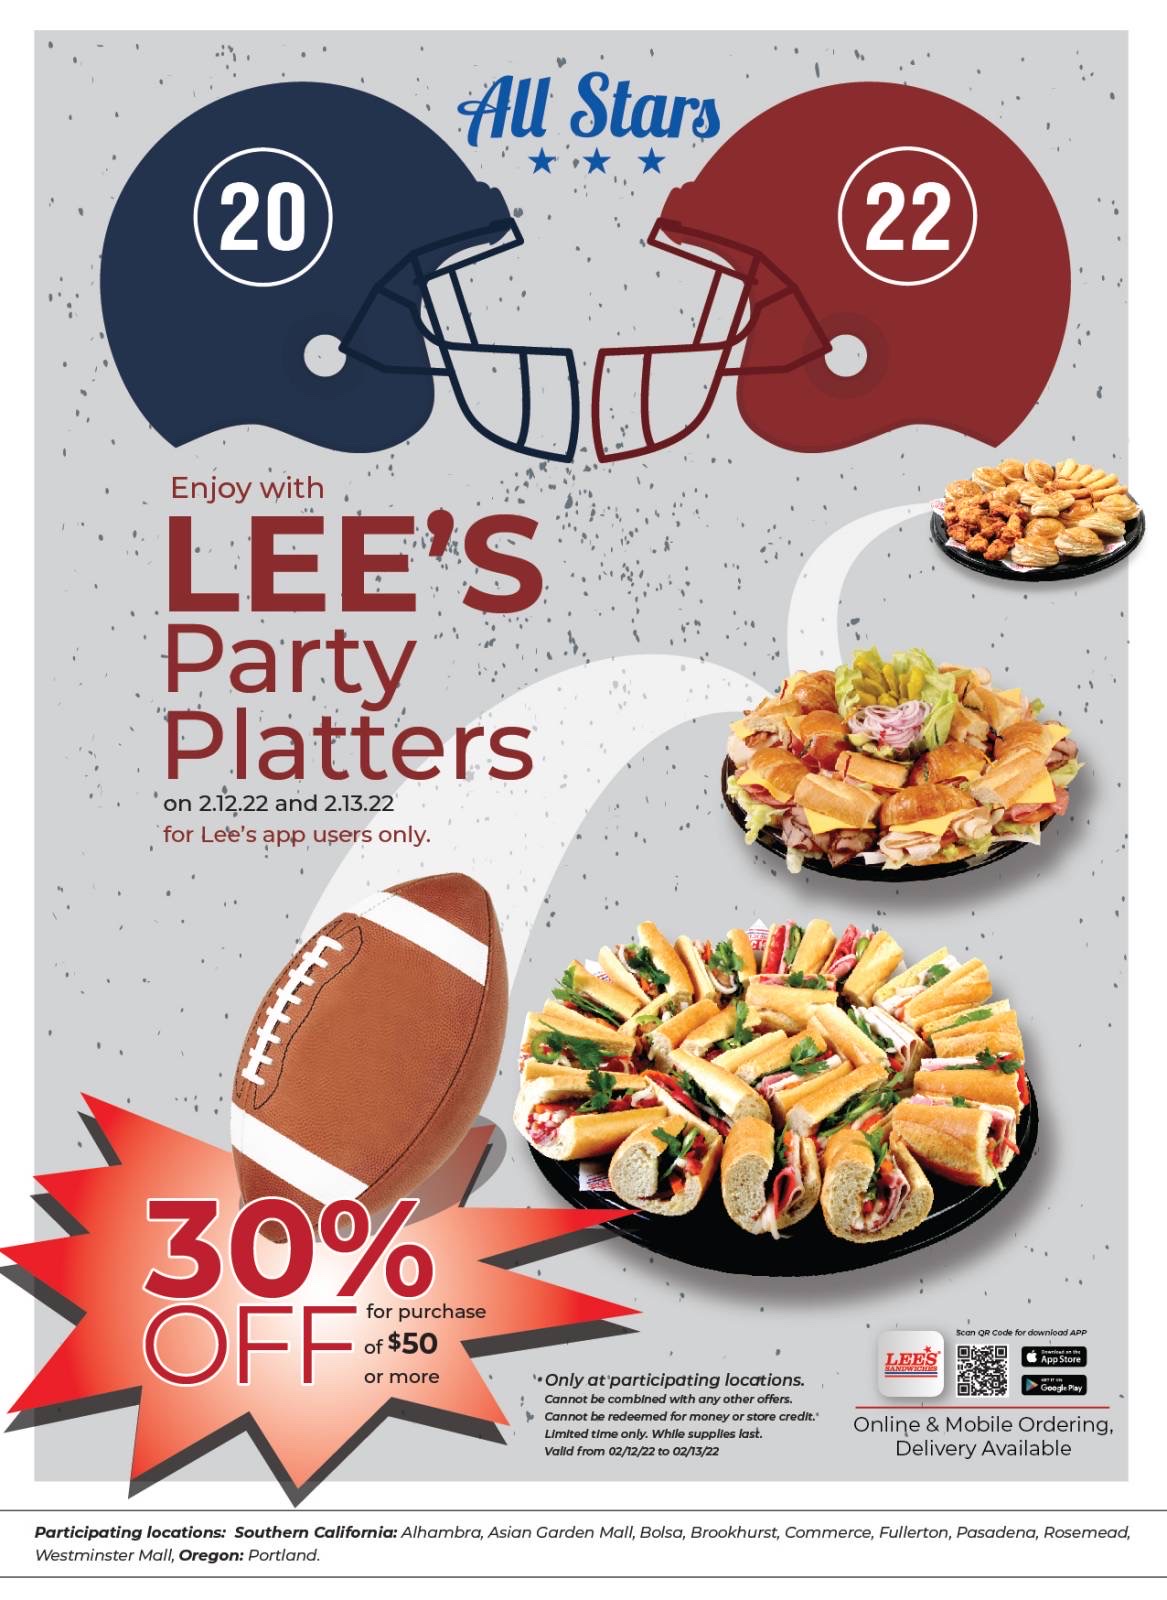 30% OFF Party Platters online orders from 2/12-2/13/2022